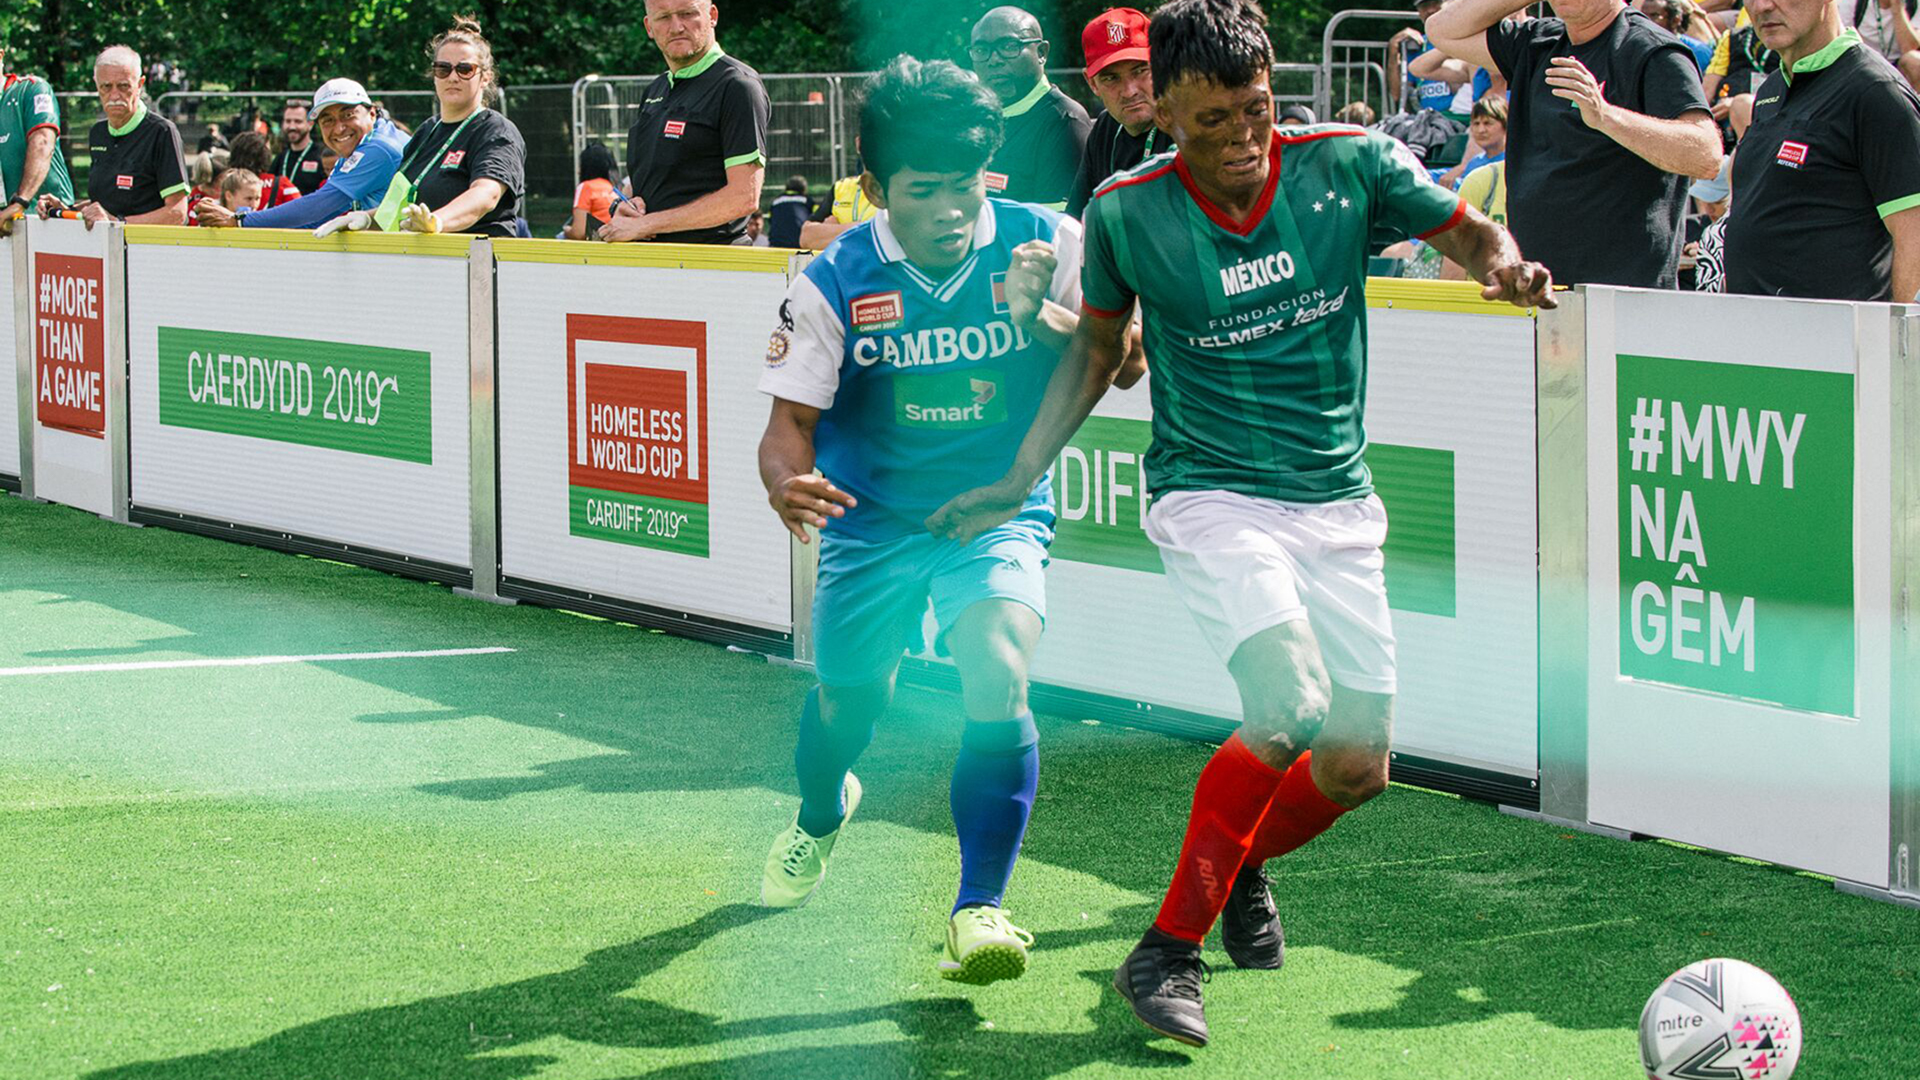 homeless World Cup Cardiff 2019